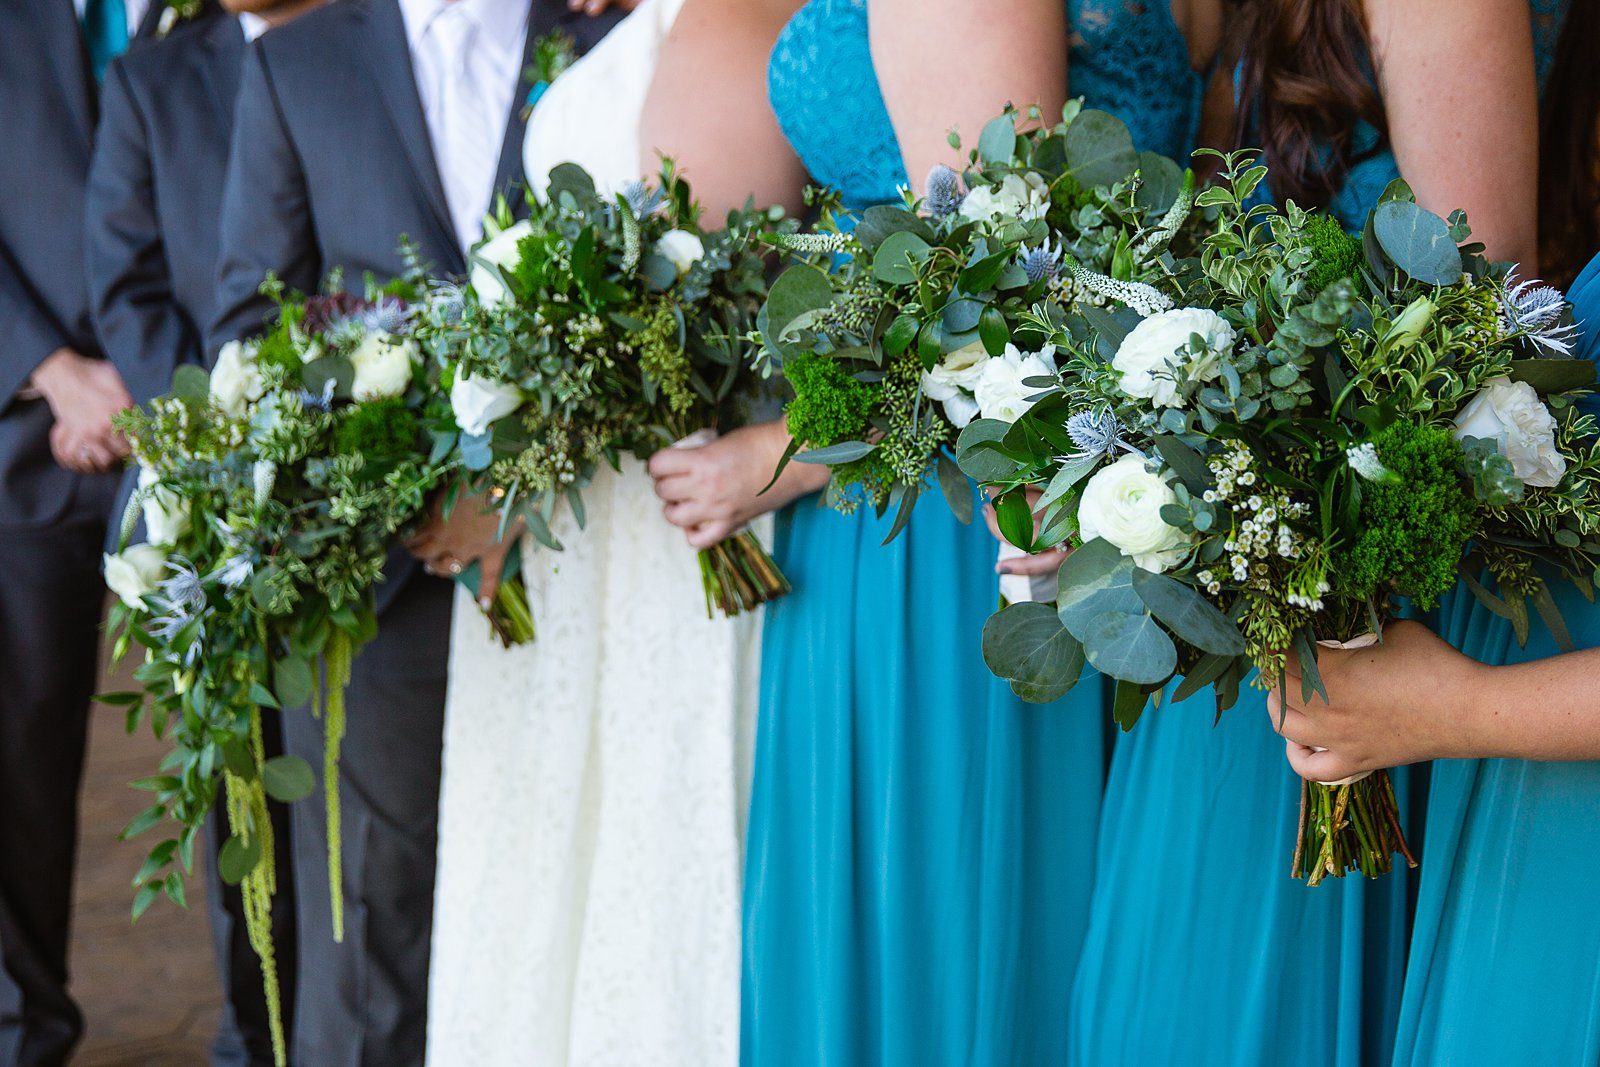 Close up image of wild white and blue garden inspired bridesmaids' bouquets by PMA Photography.